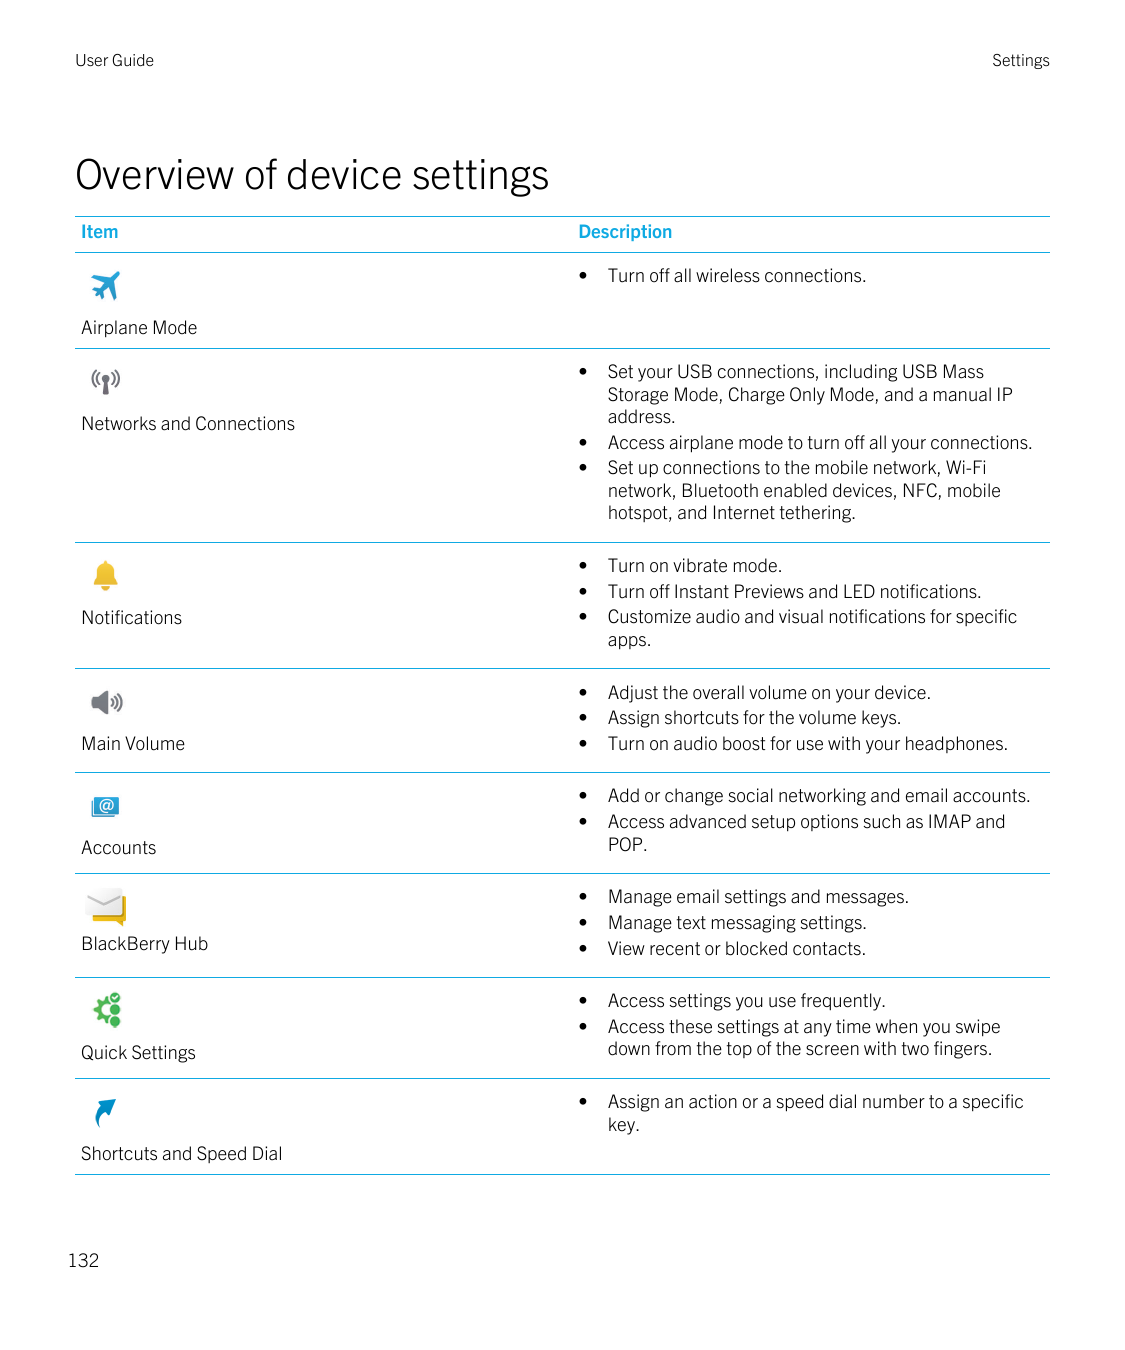 User GuideSettingsOverview of device settingsItemDescription•Turn off all wireless connections.•Set your USB connections, includ